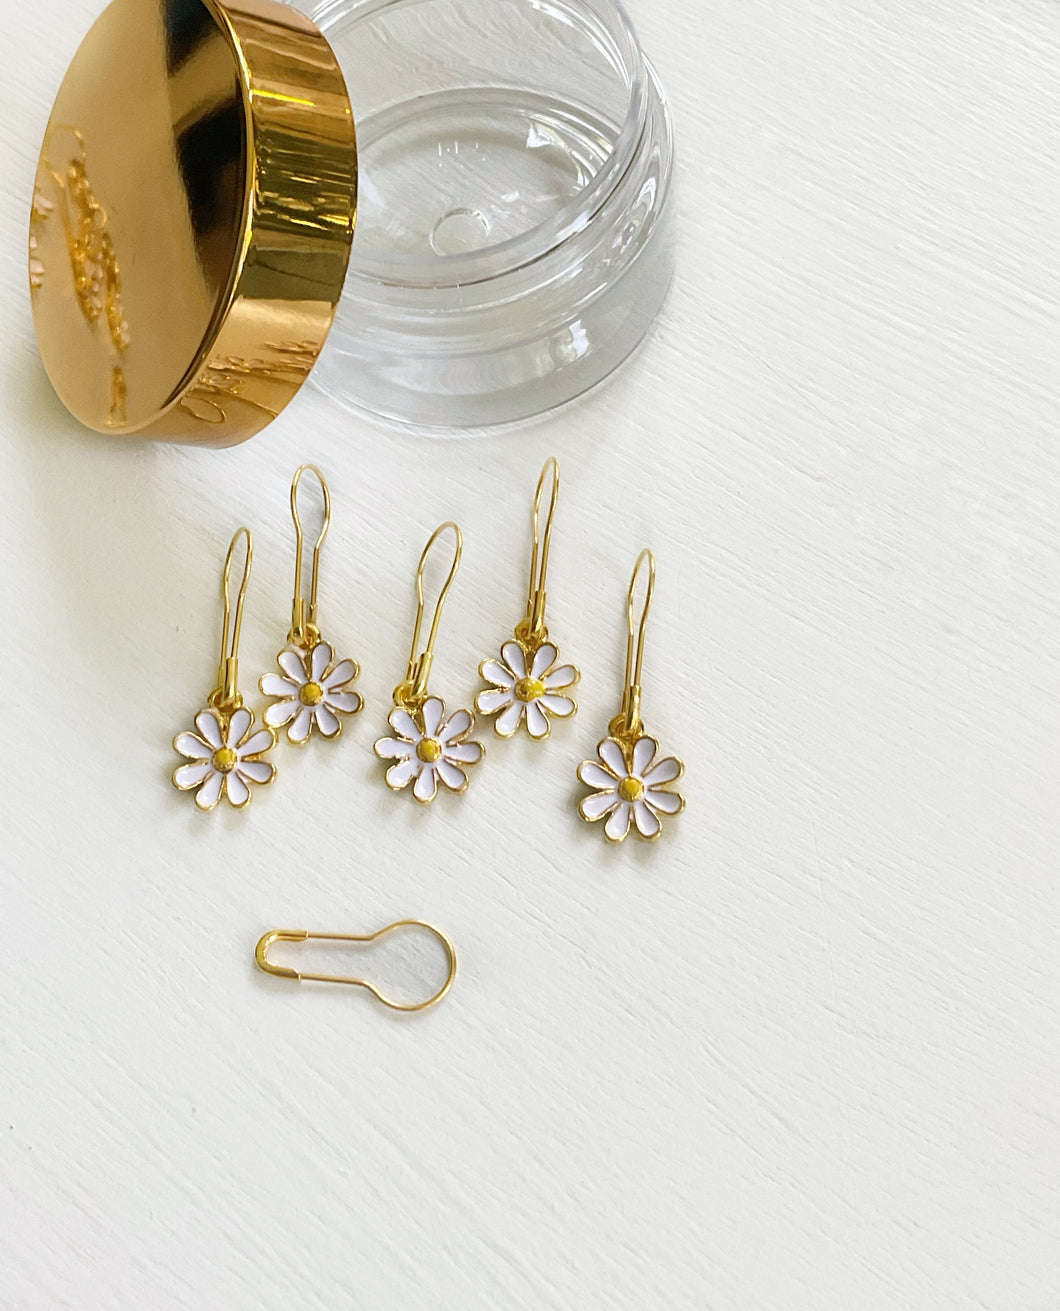 Removable Stitch Marker Sets from Pinecones and Purls - thespinninghand